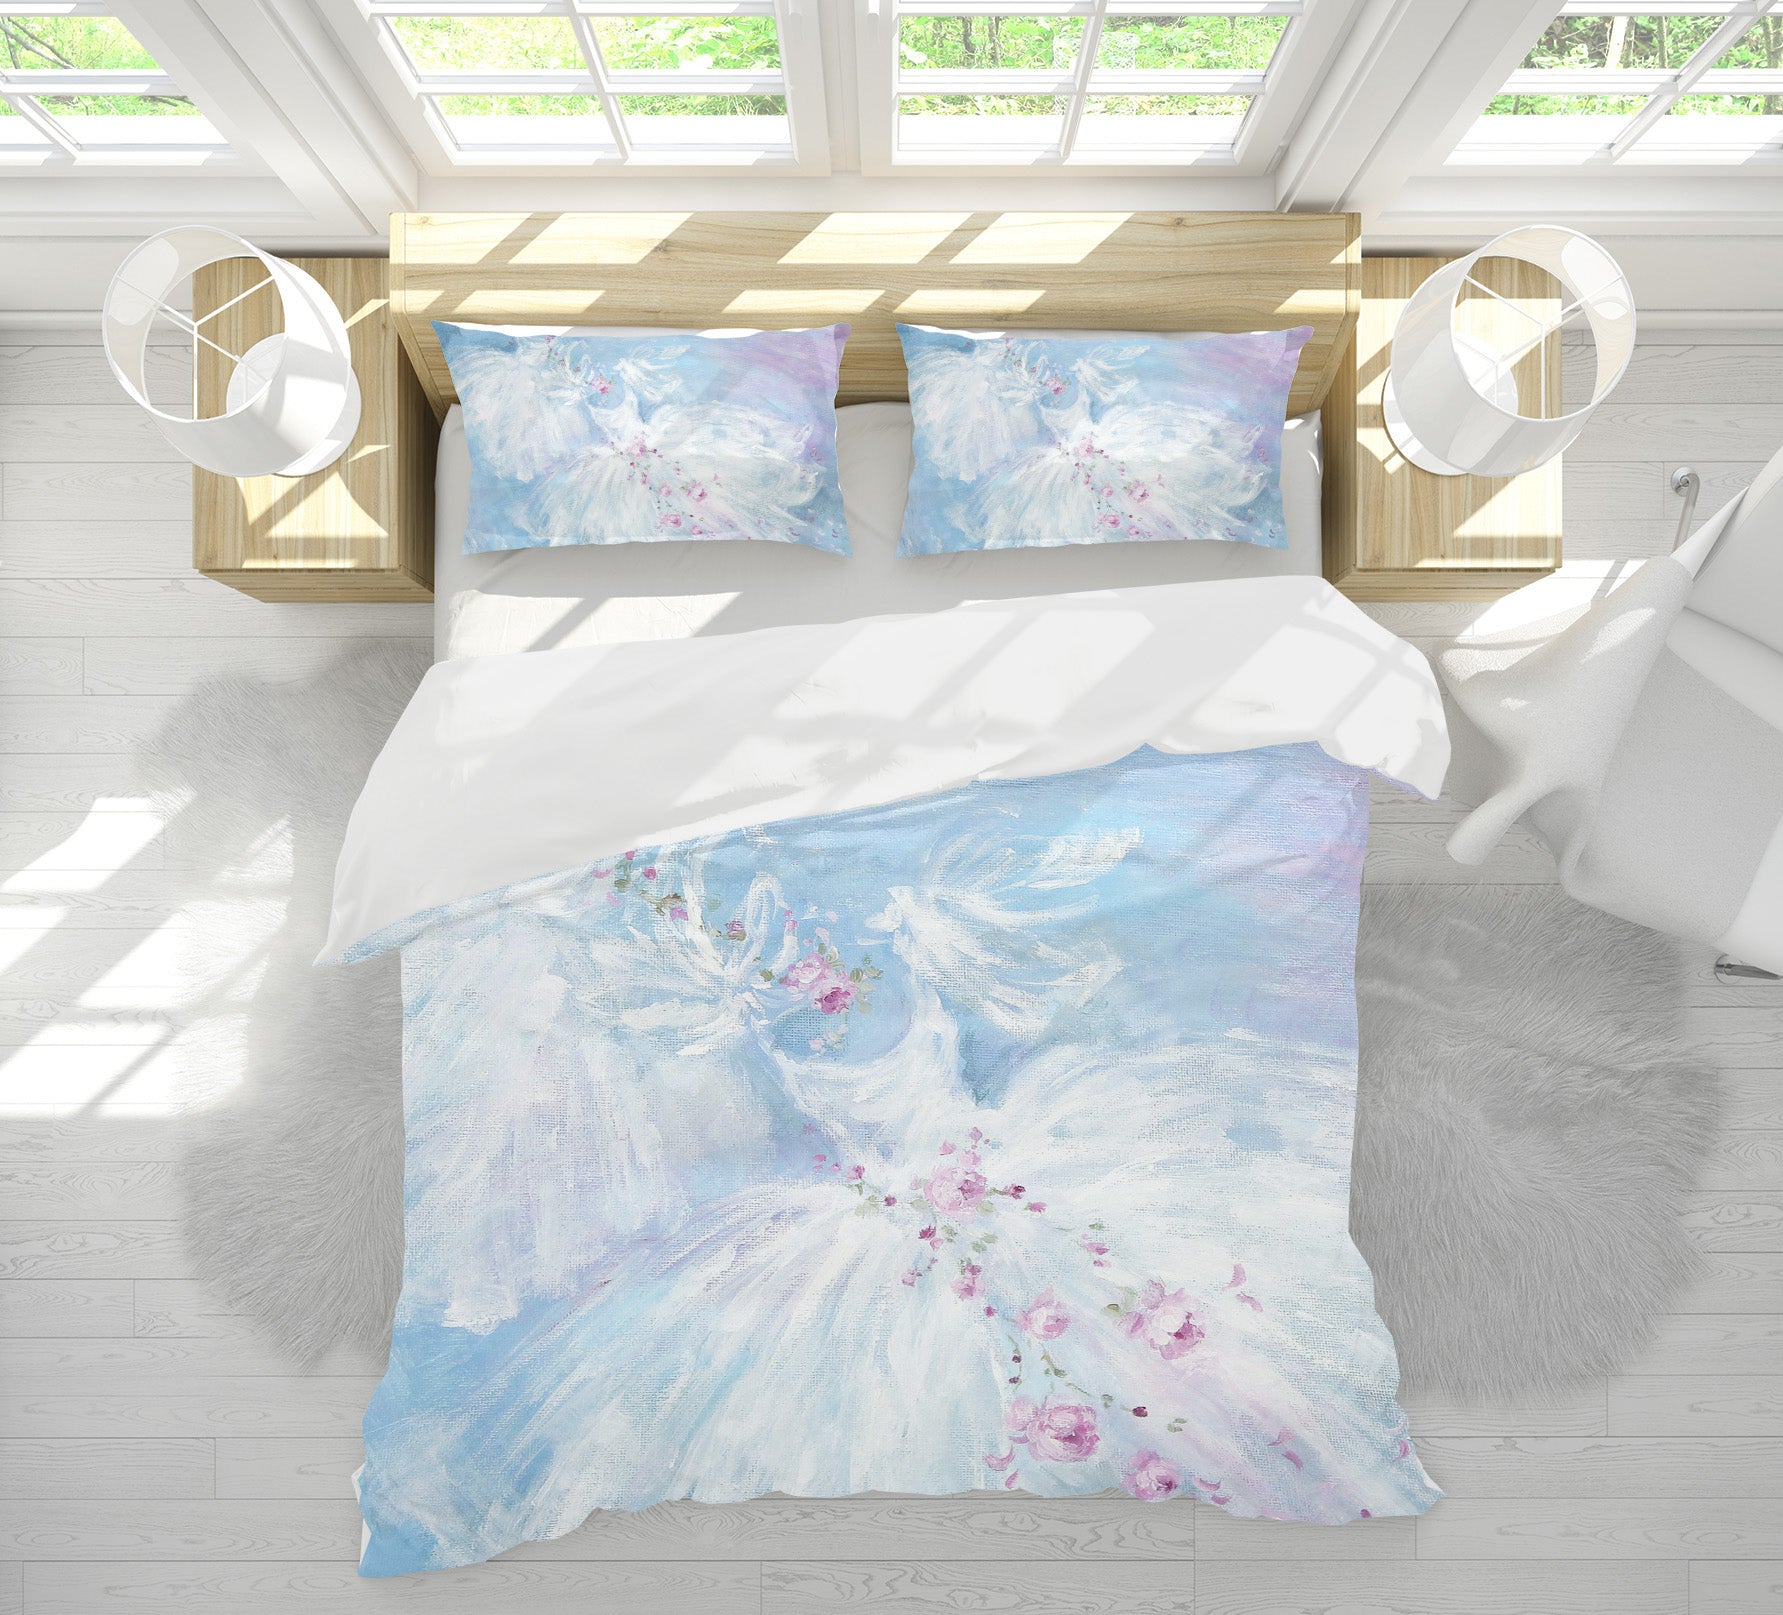 3D White Dress Pink Flower 2019 Debi Coules Bedding Bed Pillowcases Quilt